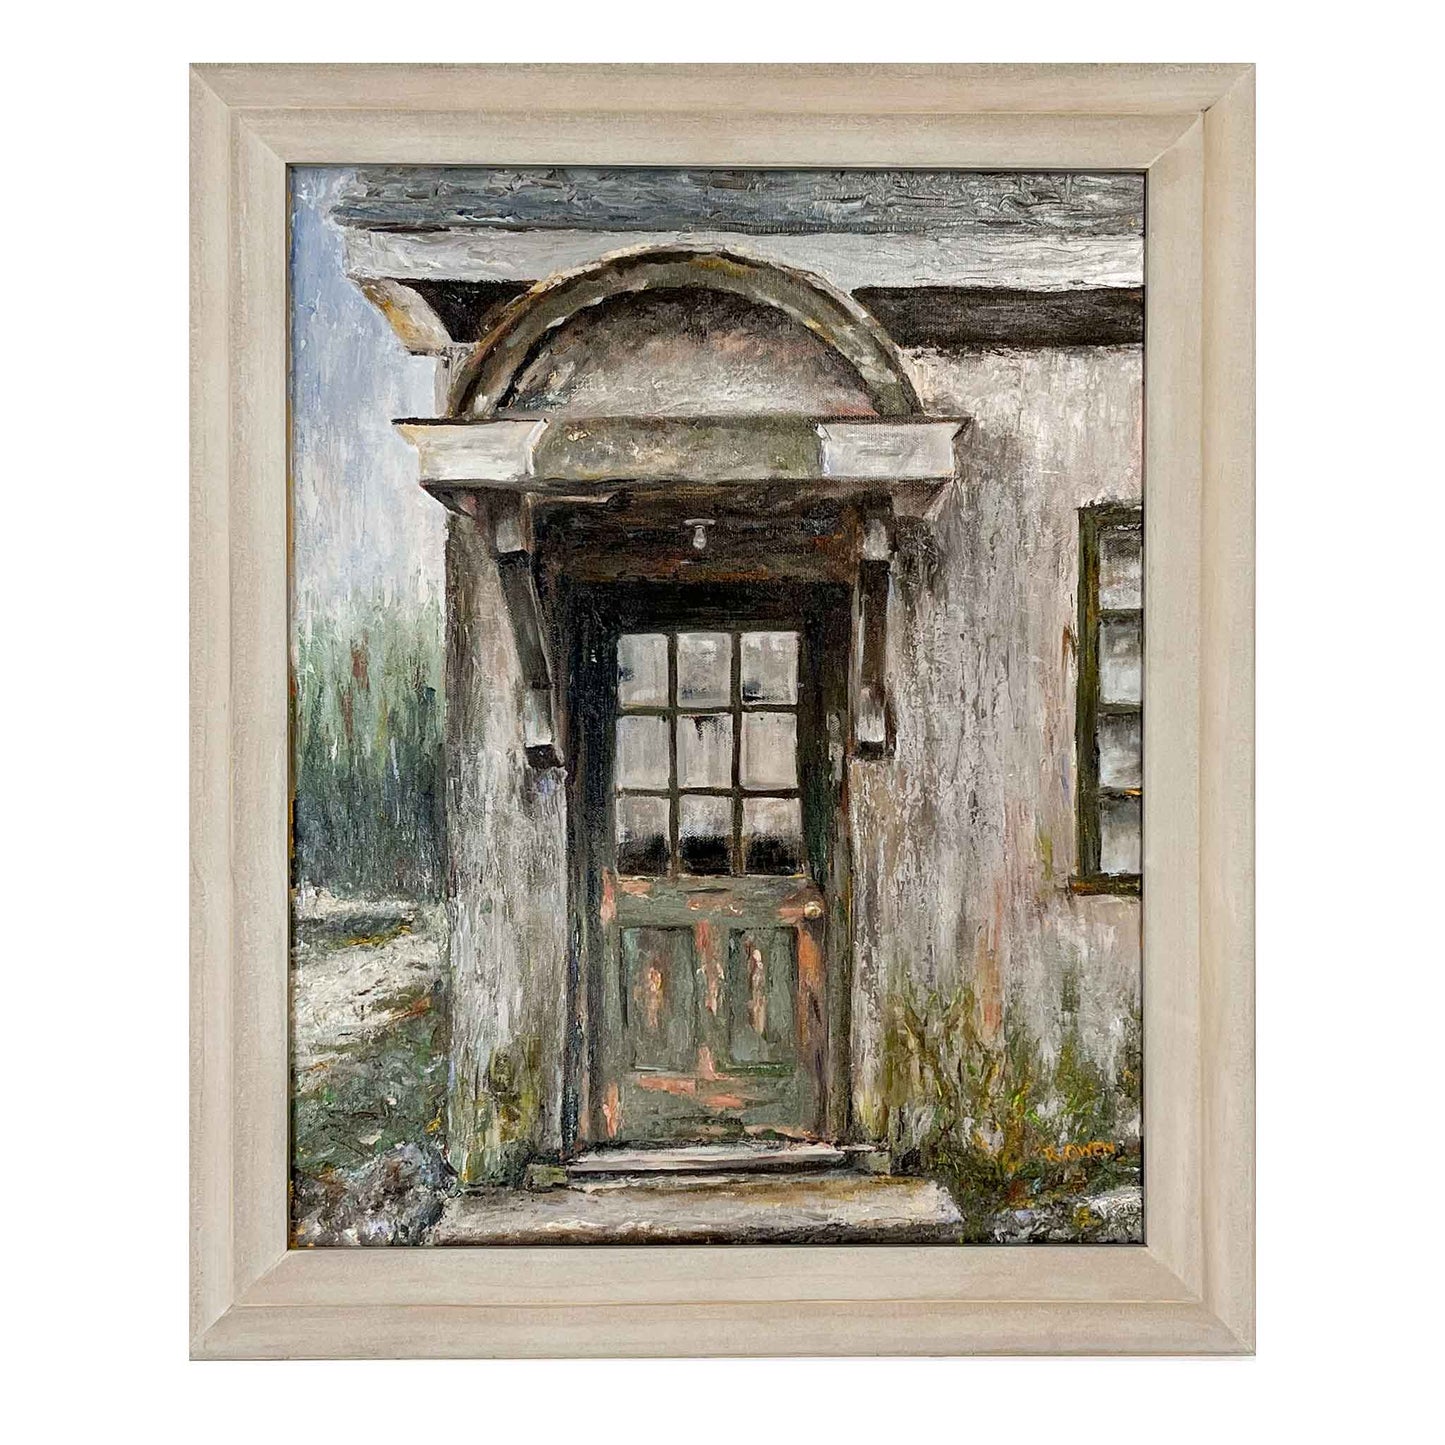 JRO Past Glory - Old Doorway Original Painting by Artist Becky Owen. Muted neutral colors showcase this old doorway with its peeling and faded paint. One bare lightbulb hangs to defy the night. 20" x 24" framed painting in a beige wooden frame. Ready to hang.